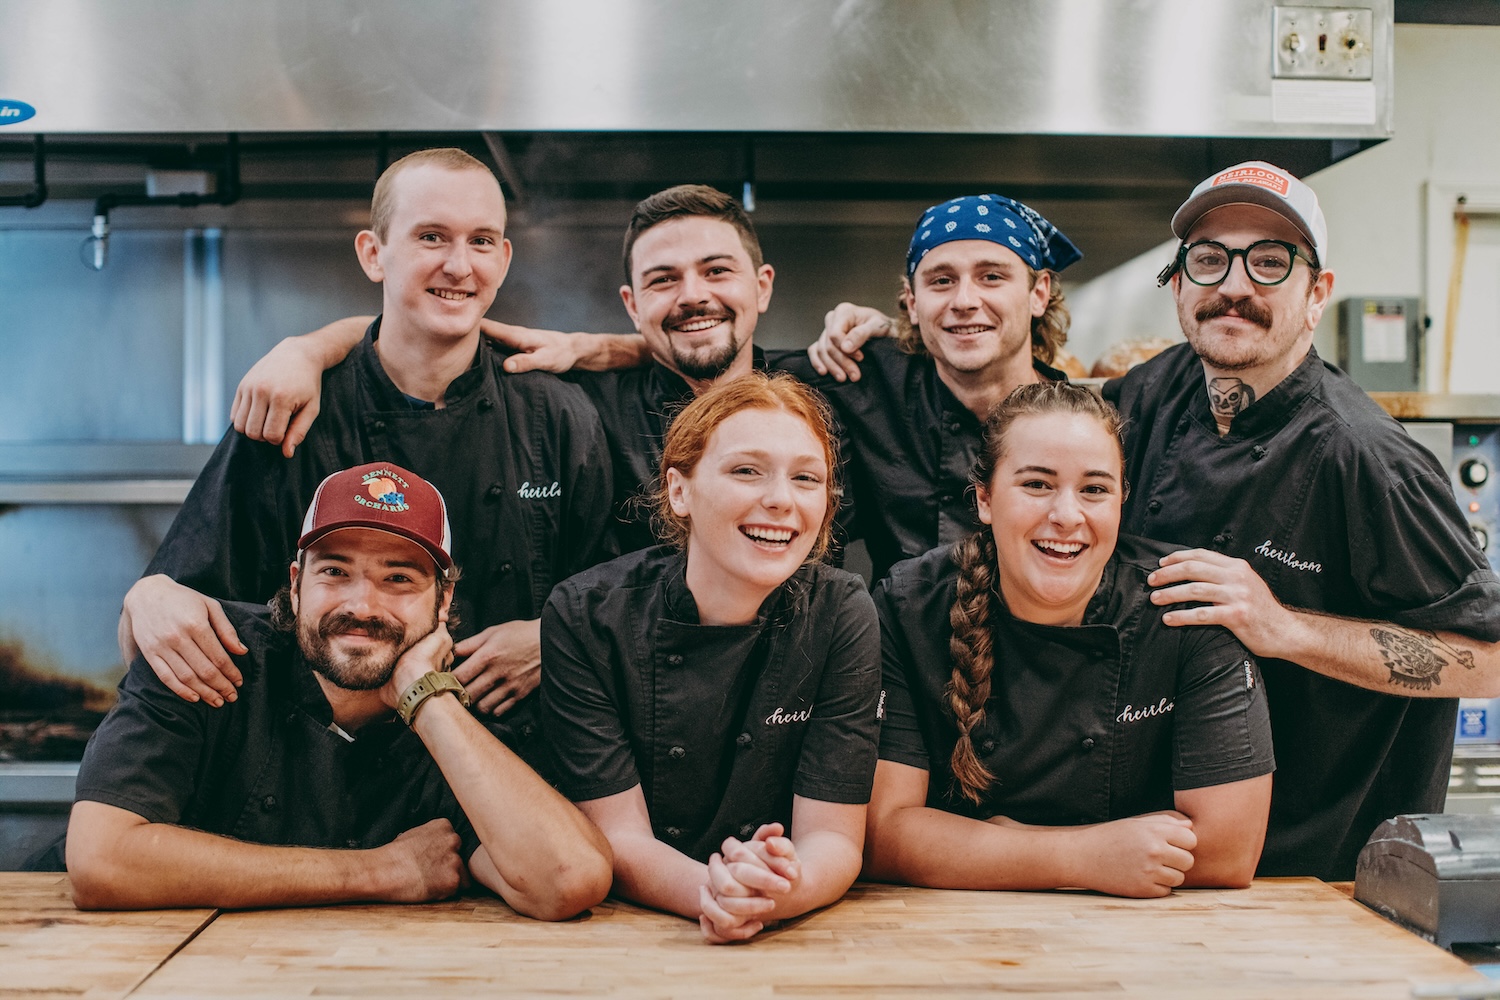 How This Restaurant is Changing Up Operations with a Group-Run Kitchen